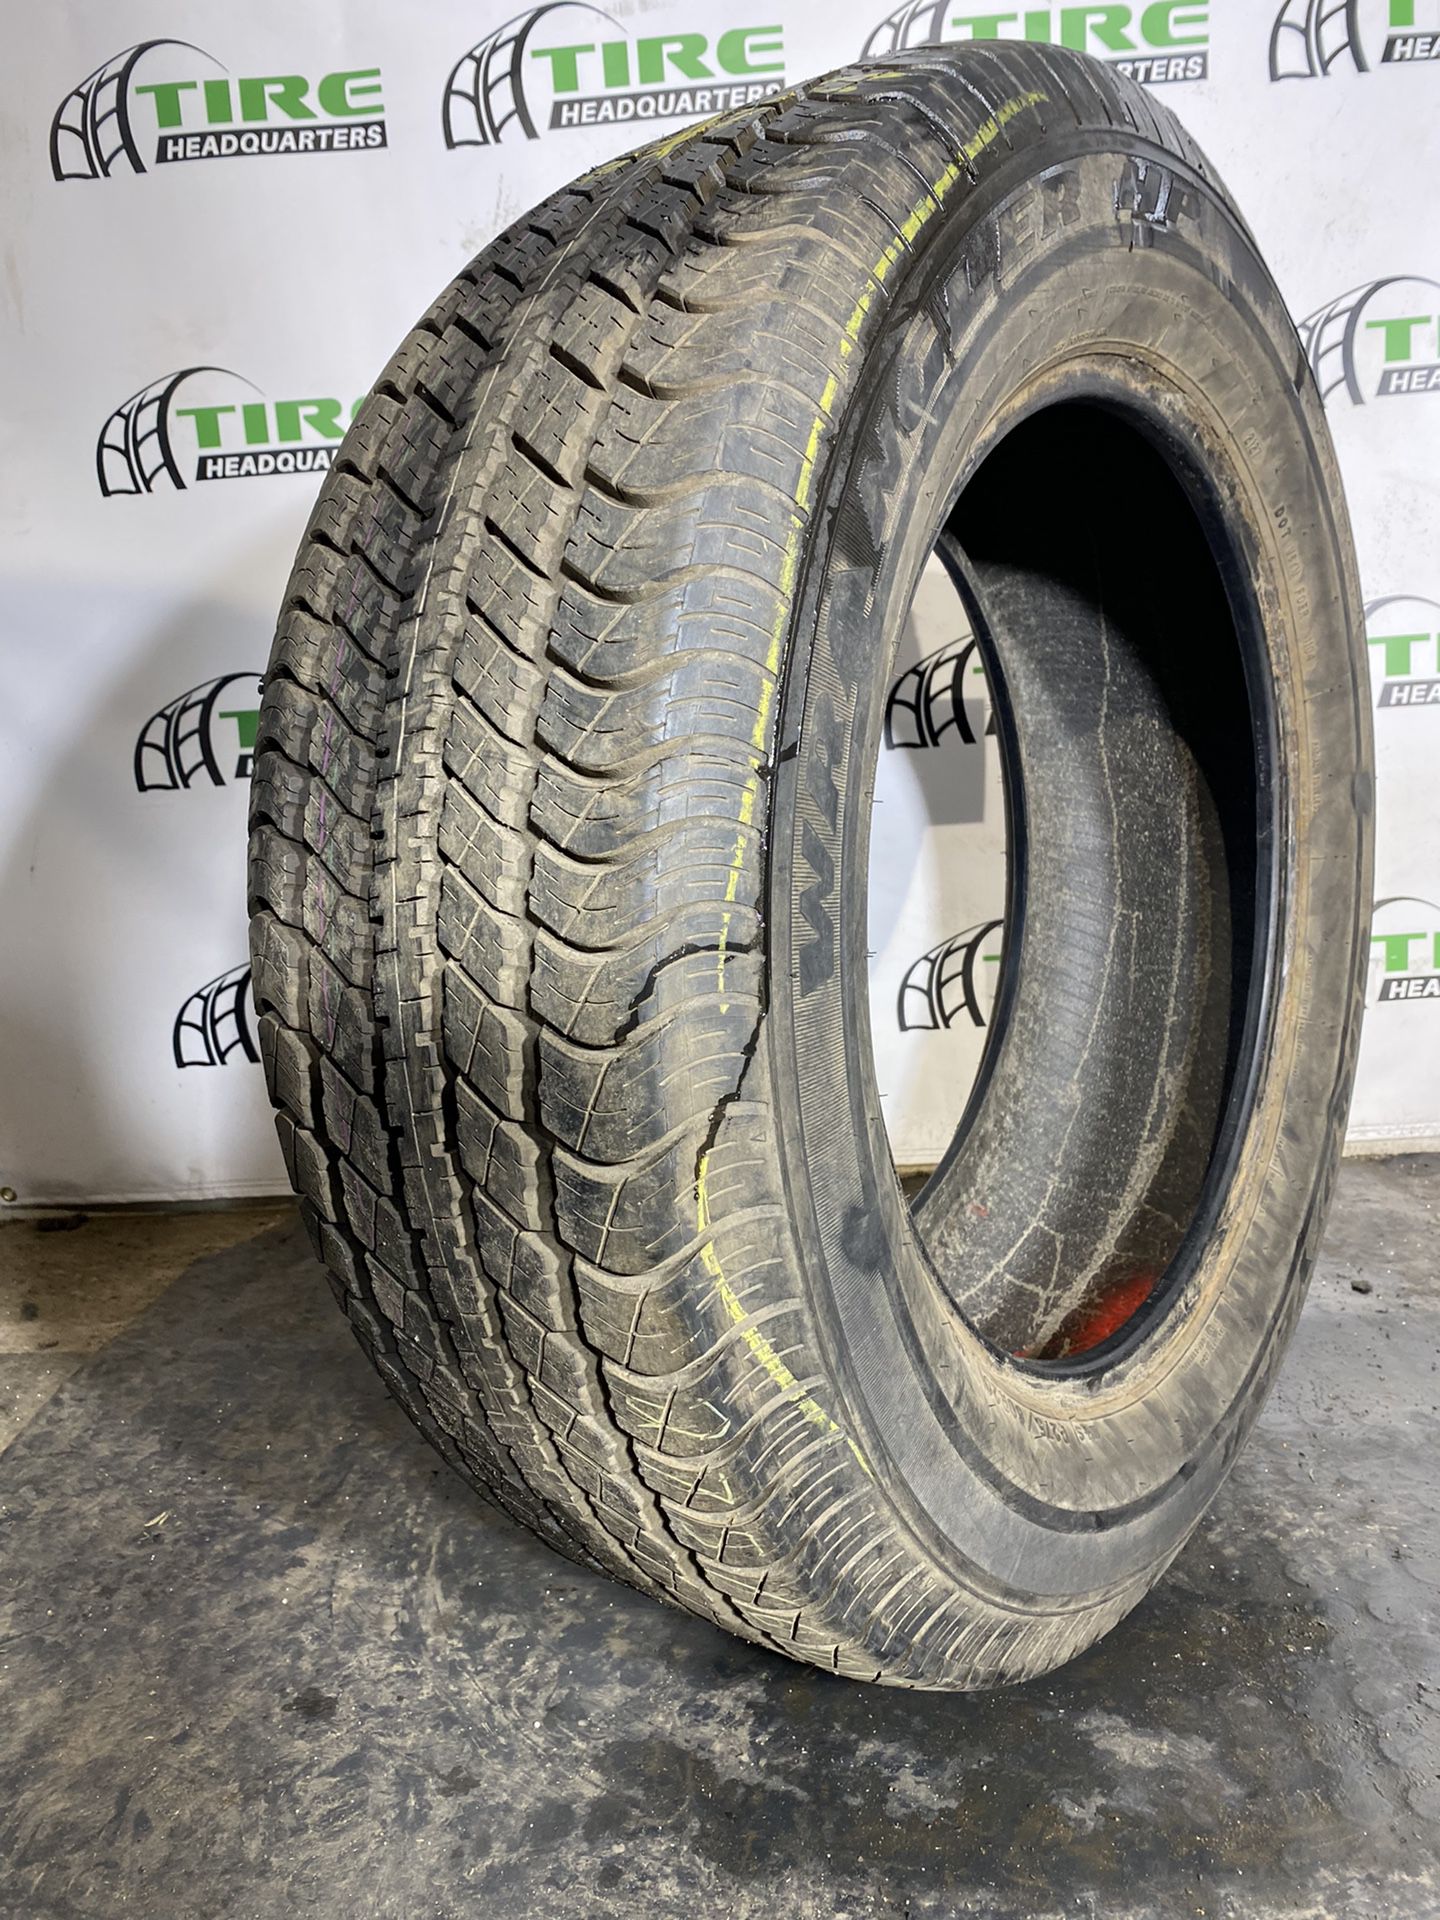 275 60 20 275/60R20 Goodyear Wrangler HP Used All Season One Single Tire  (1) for Sale in Sauk Village, IL - OfferUp